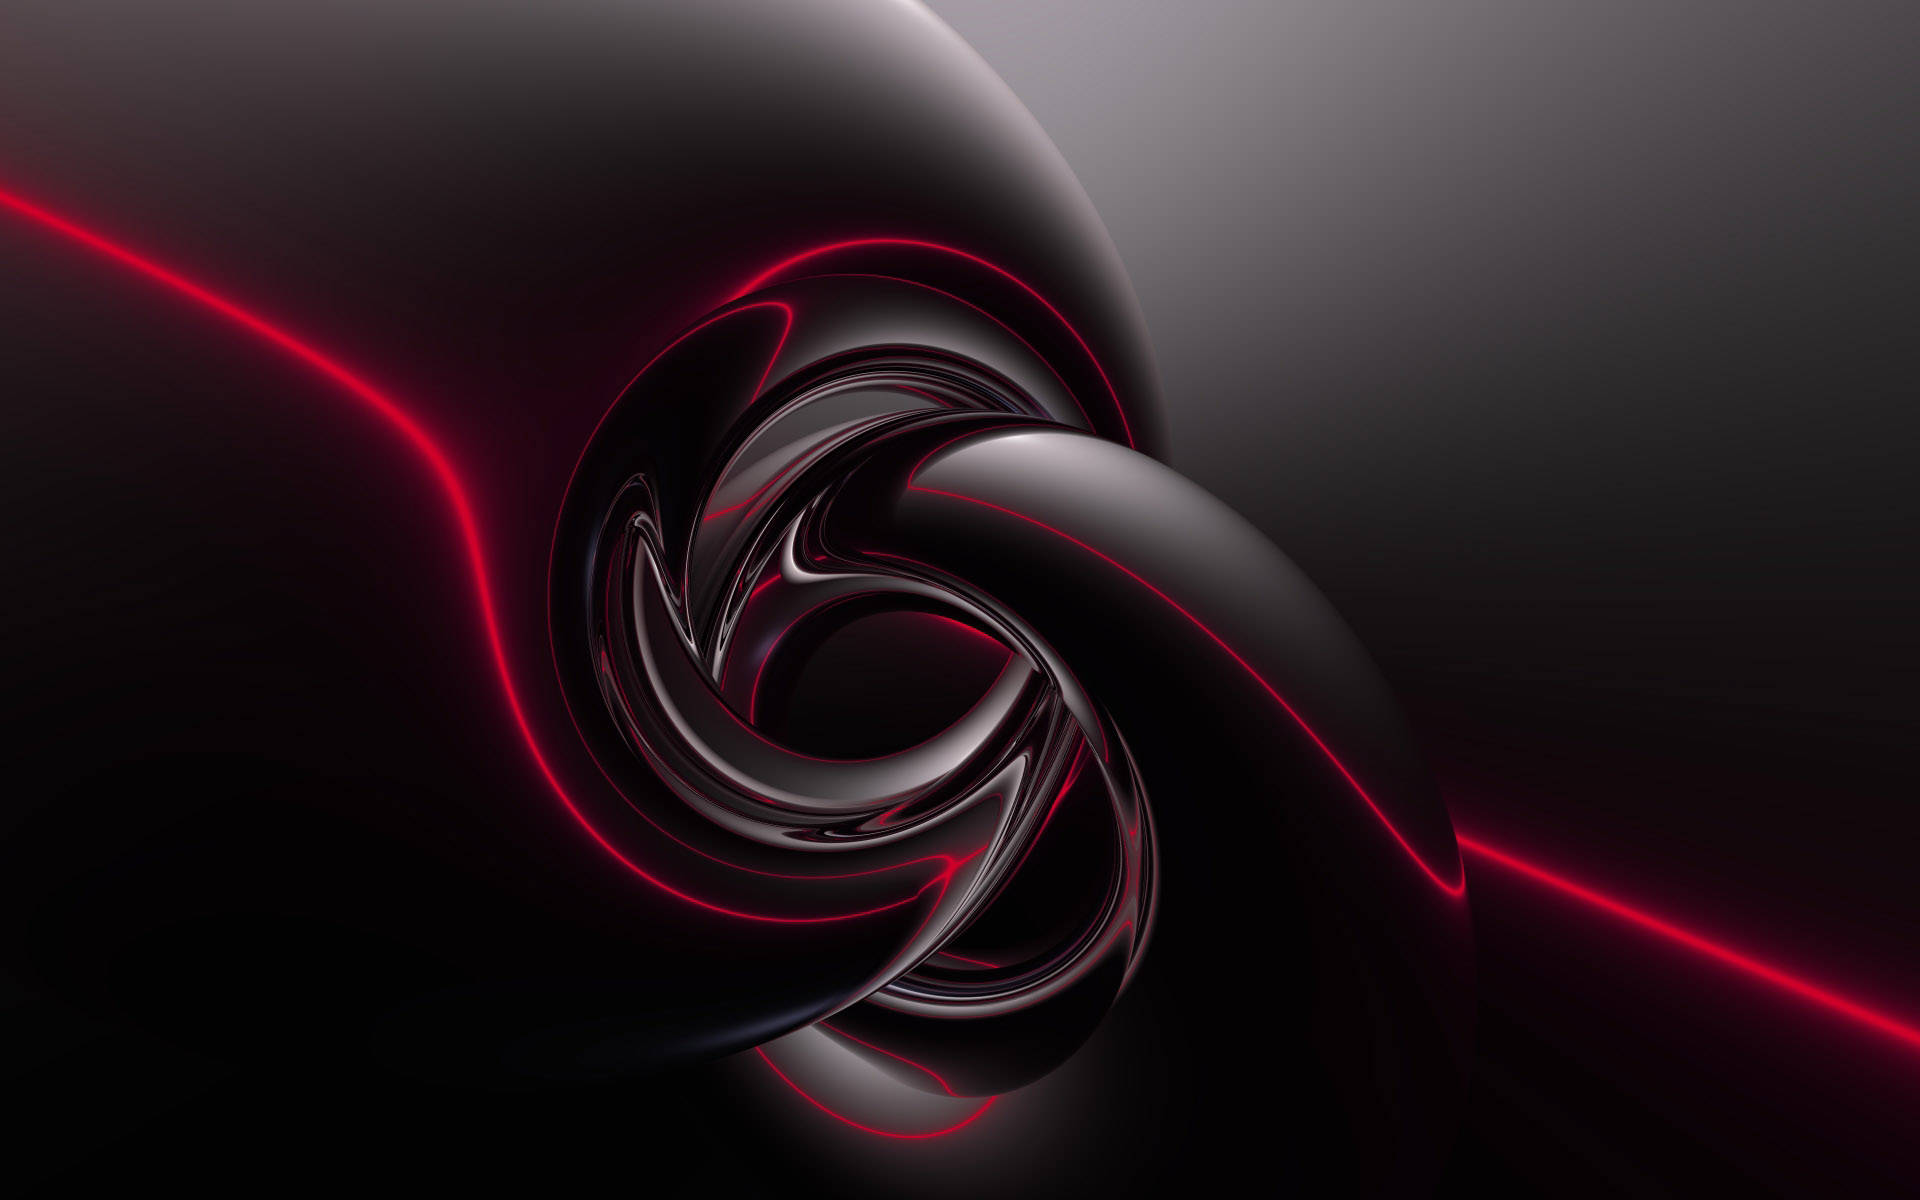 Glossy Red And Black Abstract Wallpaper